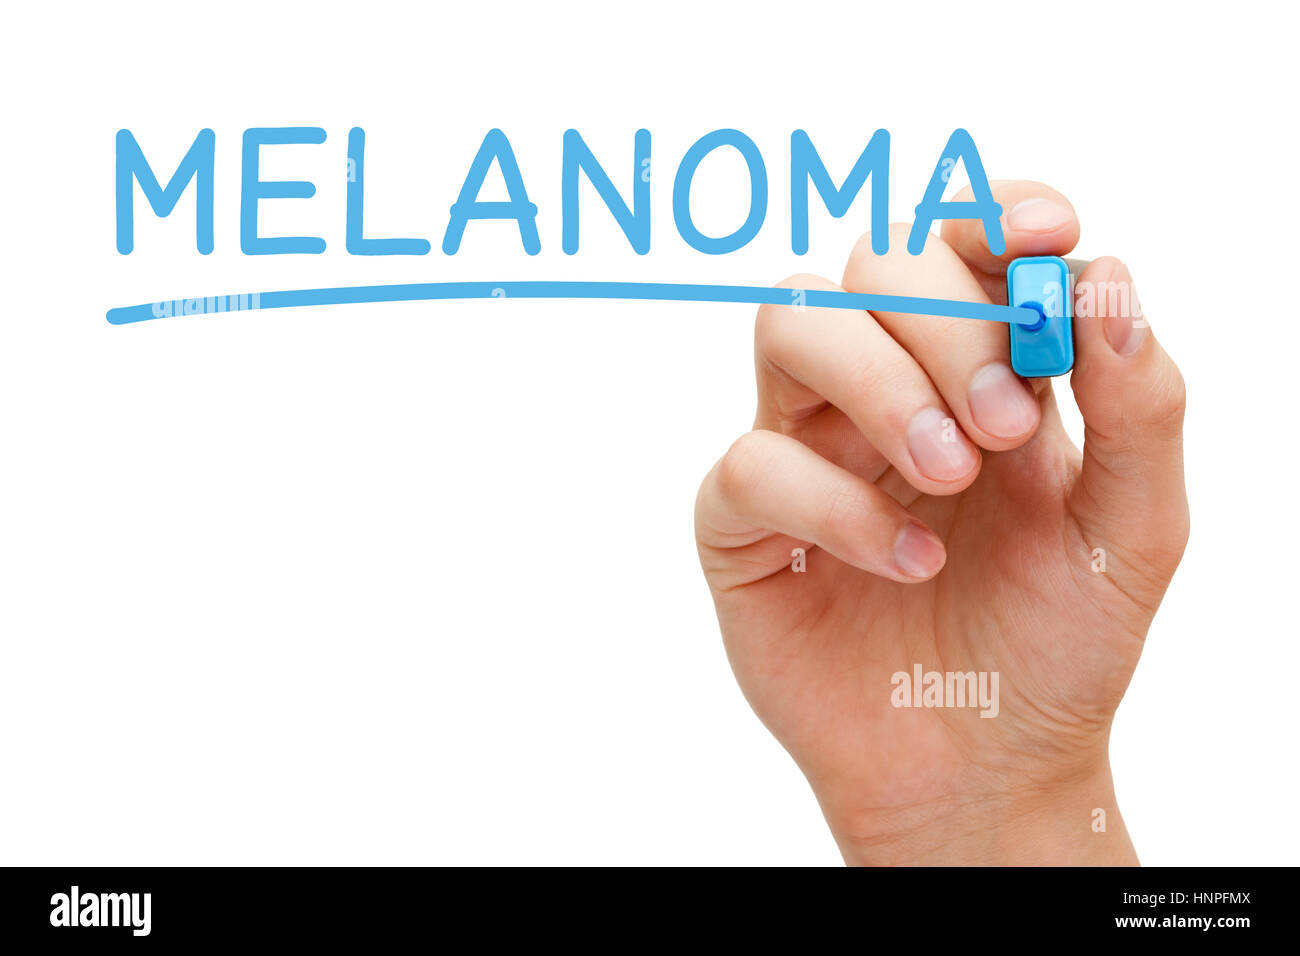 Hand writing Melanoma with blue marker on transparent glass board. Stock Photo